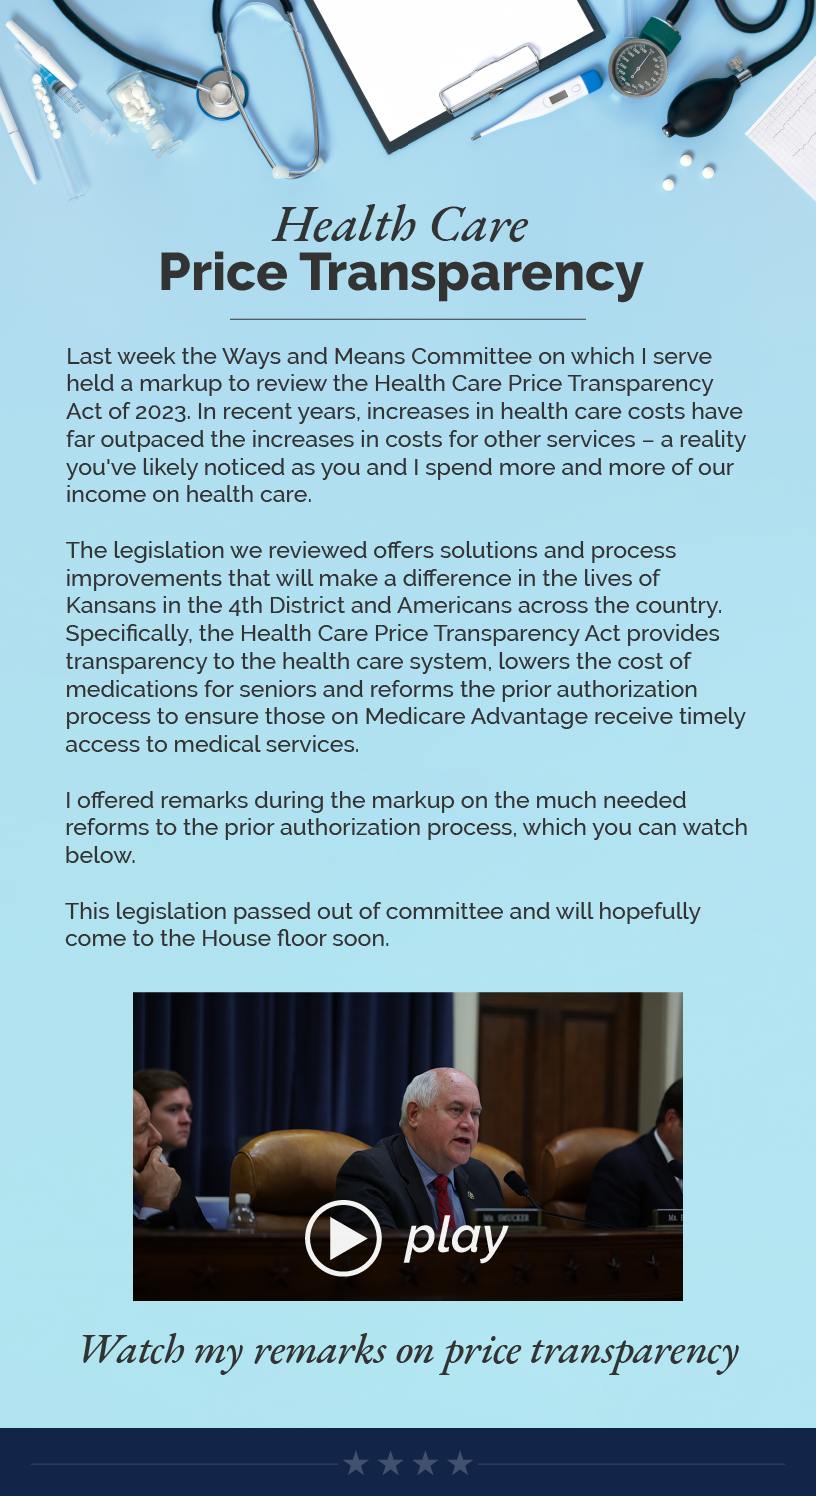 Headline: Health Care Price Transparency. Last week the Ways and Means Committee on which I serve held a markup to review the Health Care Price Transparency Act of 2023. In recent years, increases in health care costs have far outpaced the increases in costs for other services – a reality you've likely noticed as you and I spend more and more of our income on health care.  The legislation we reviewed offers solutions and process improvements that will make a difference in the lives of Kansans in the 4th District and Americans across the country. Specifically, the Health Care Price Transparency Act provides transparency to the health care system, lowers the cost of medications for seniors and reforms the prior authorization process to ensure those on Medicare Advantage receive timely access to medical services.  I offered remarks during the markup on the much needed reforms to the prior authorization process, which you can watch below.  This legislation passed out of committee and will hopefully come to the House floor soon.  LINK: https://youtu.be/Un2BcVd7xFk